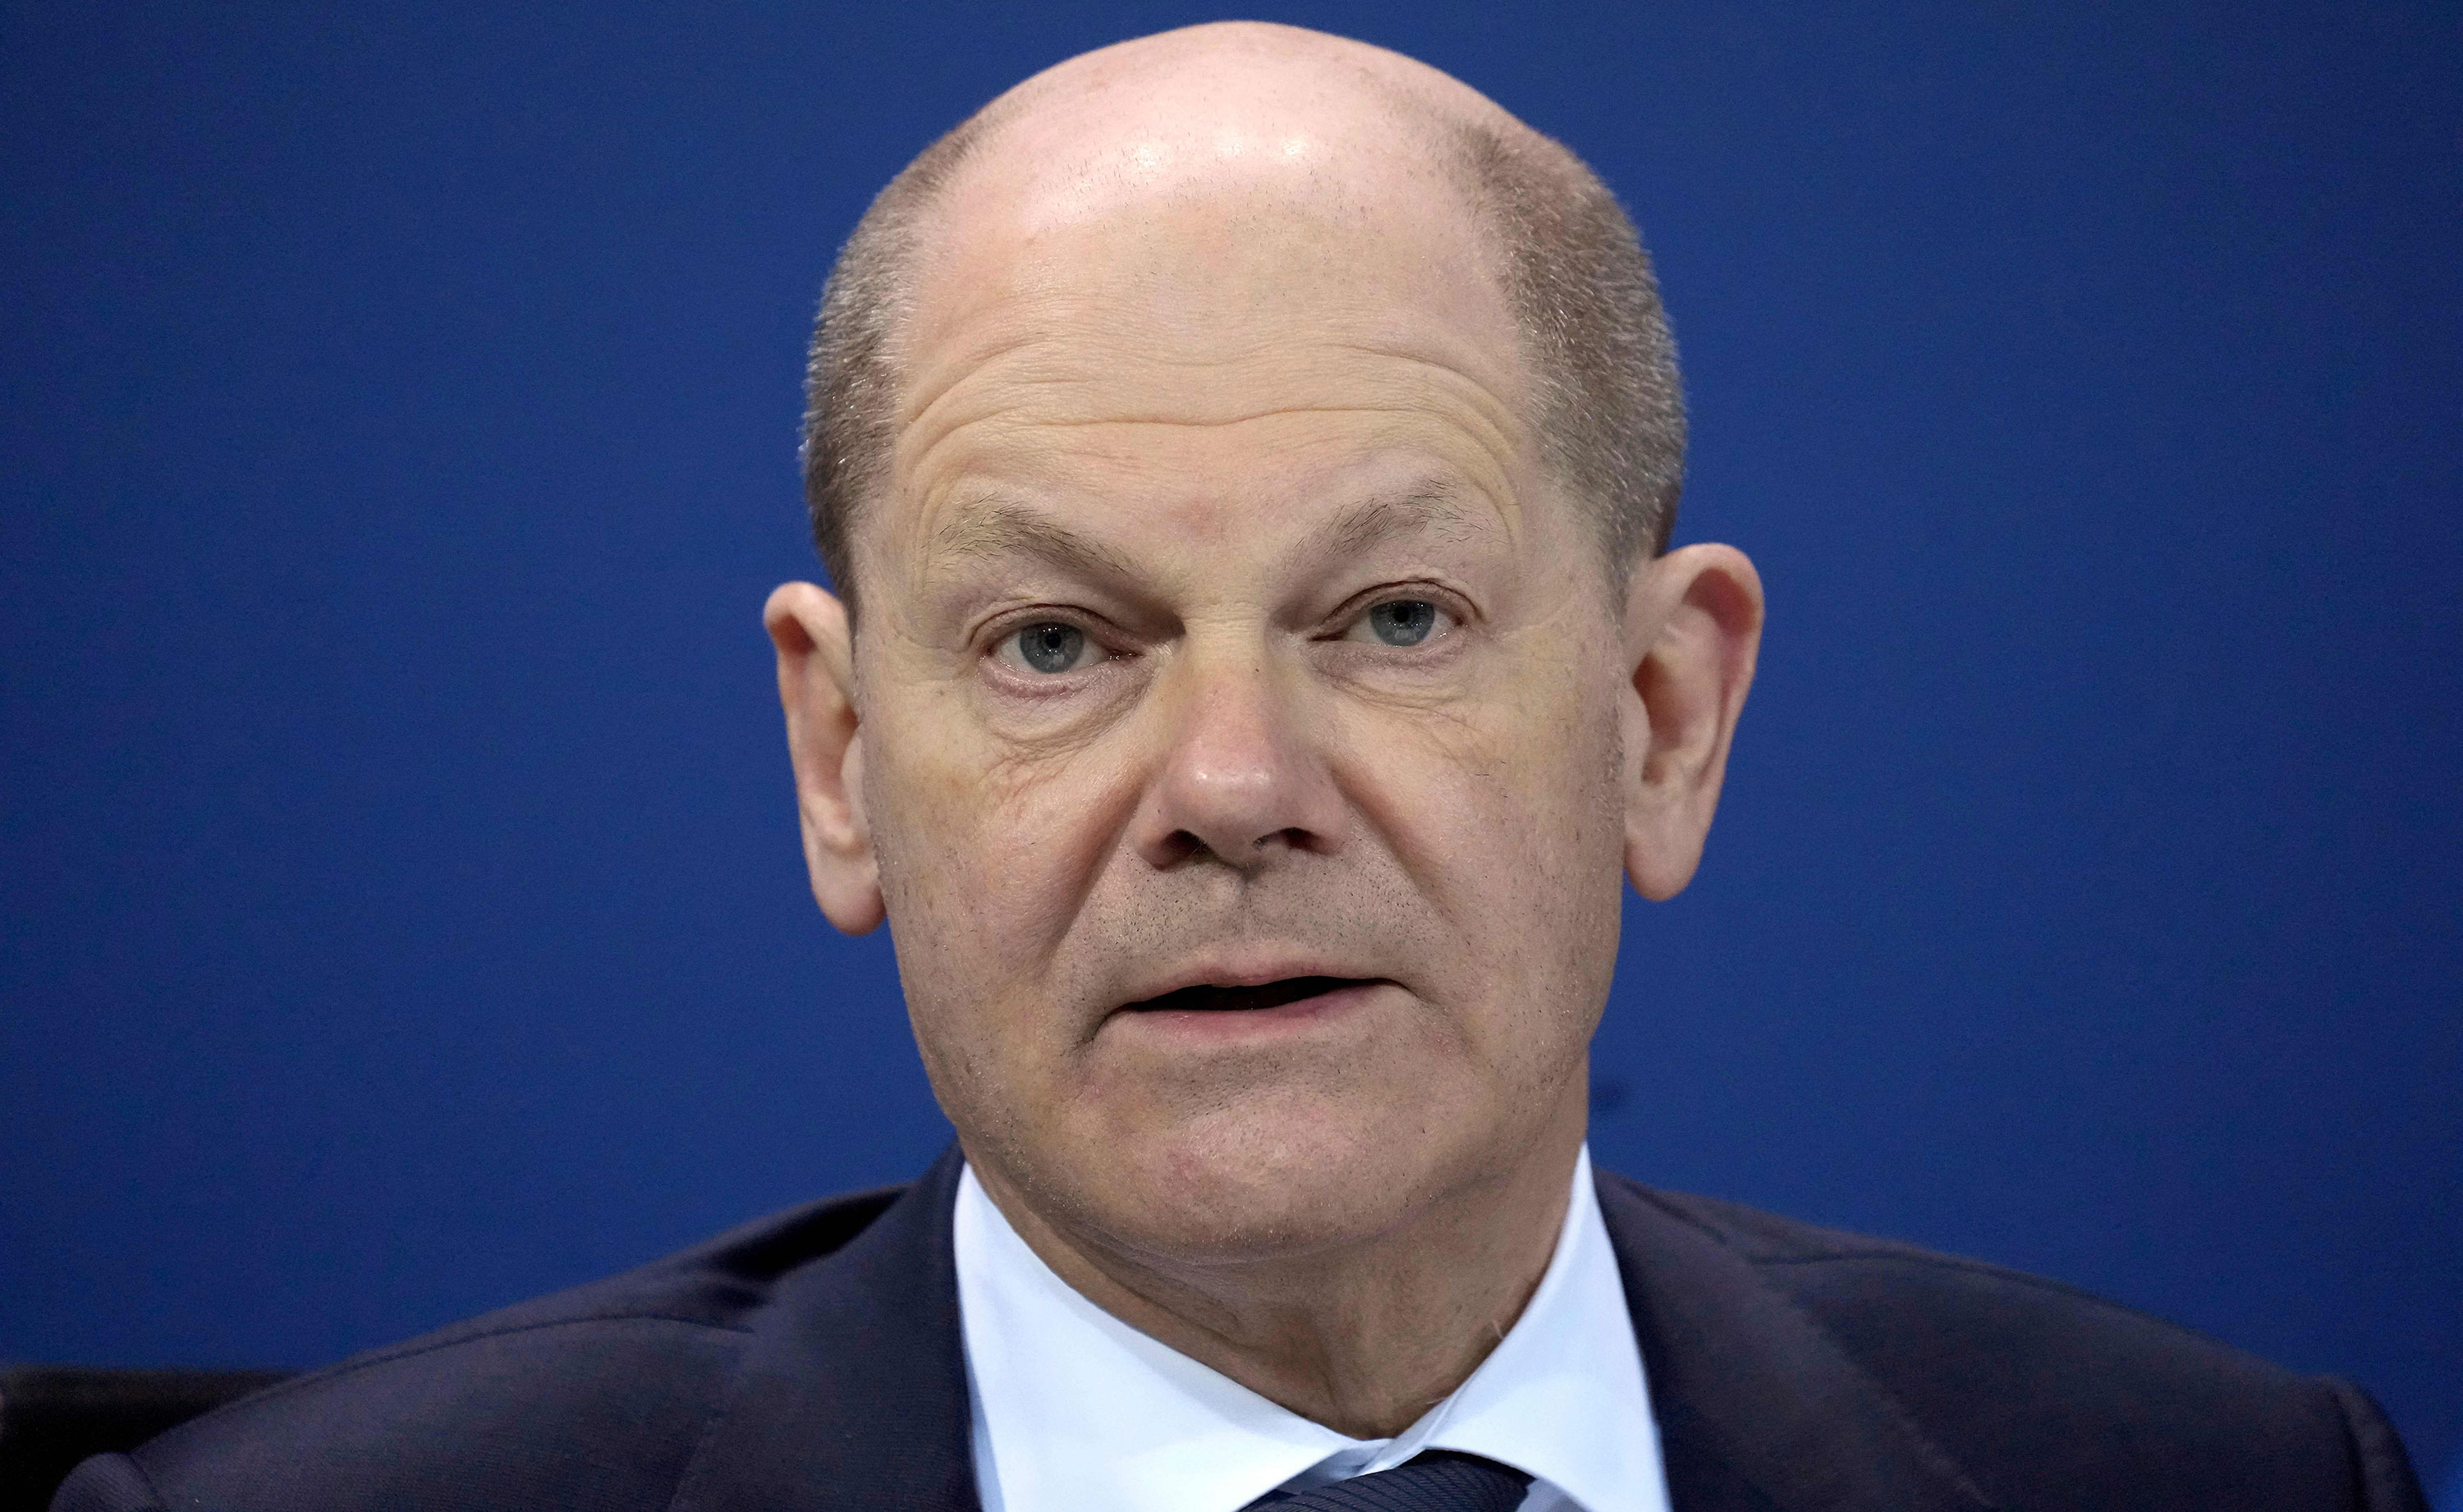 German Chancellor Olaf Scholz arrives for a press conference in Berlin on Thursday.